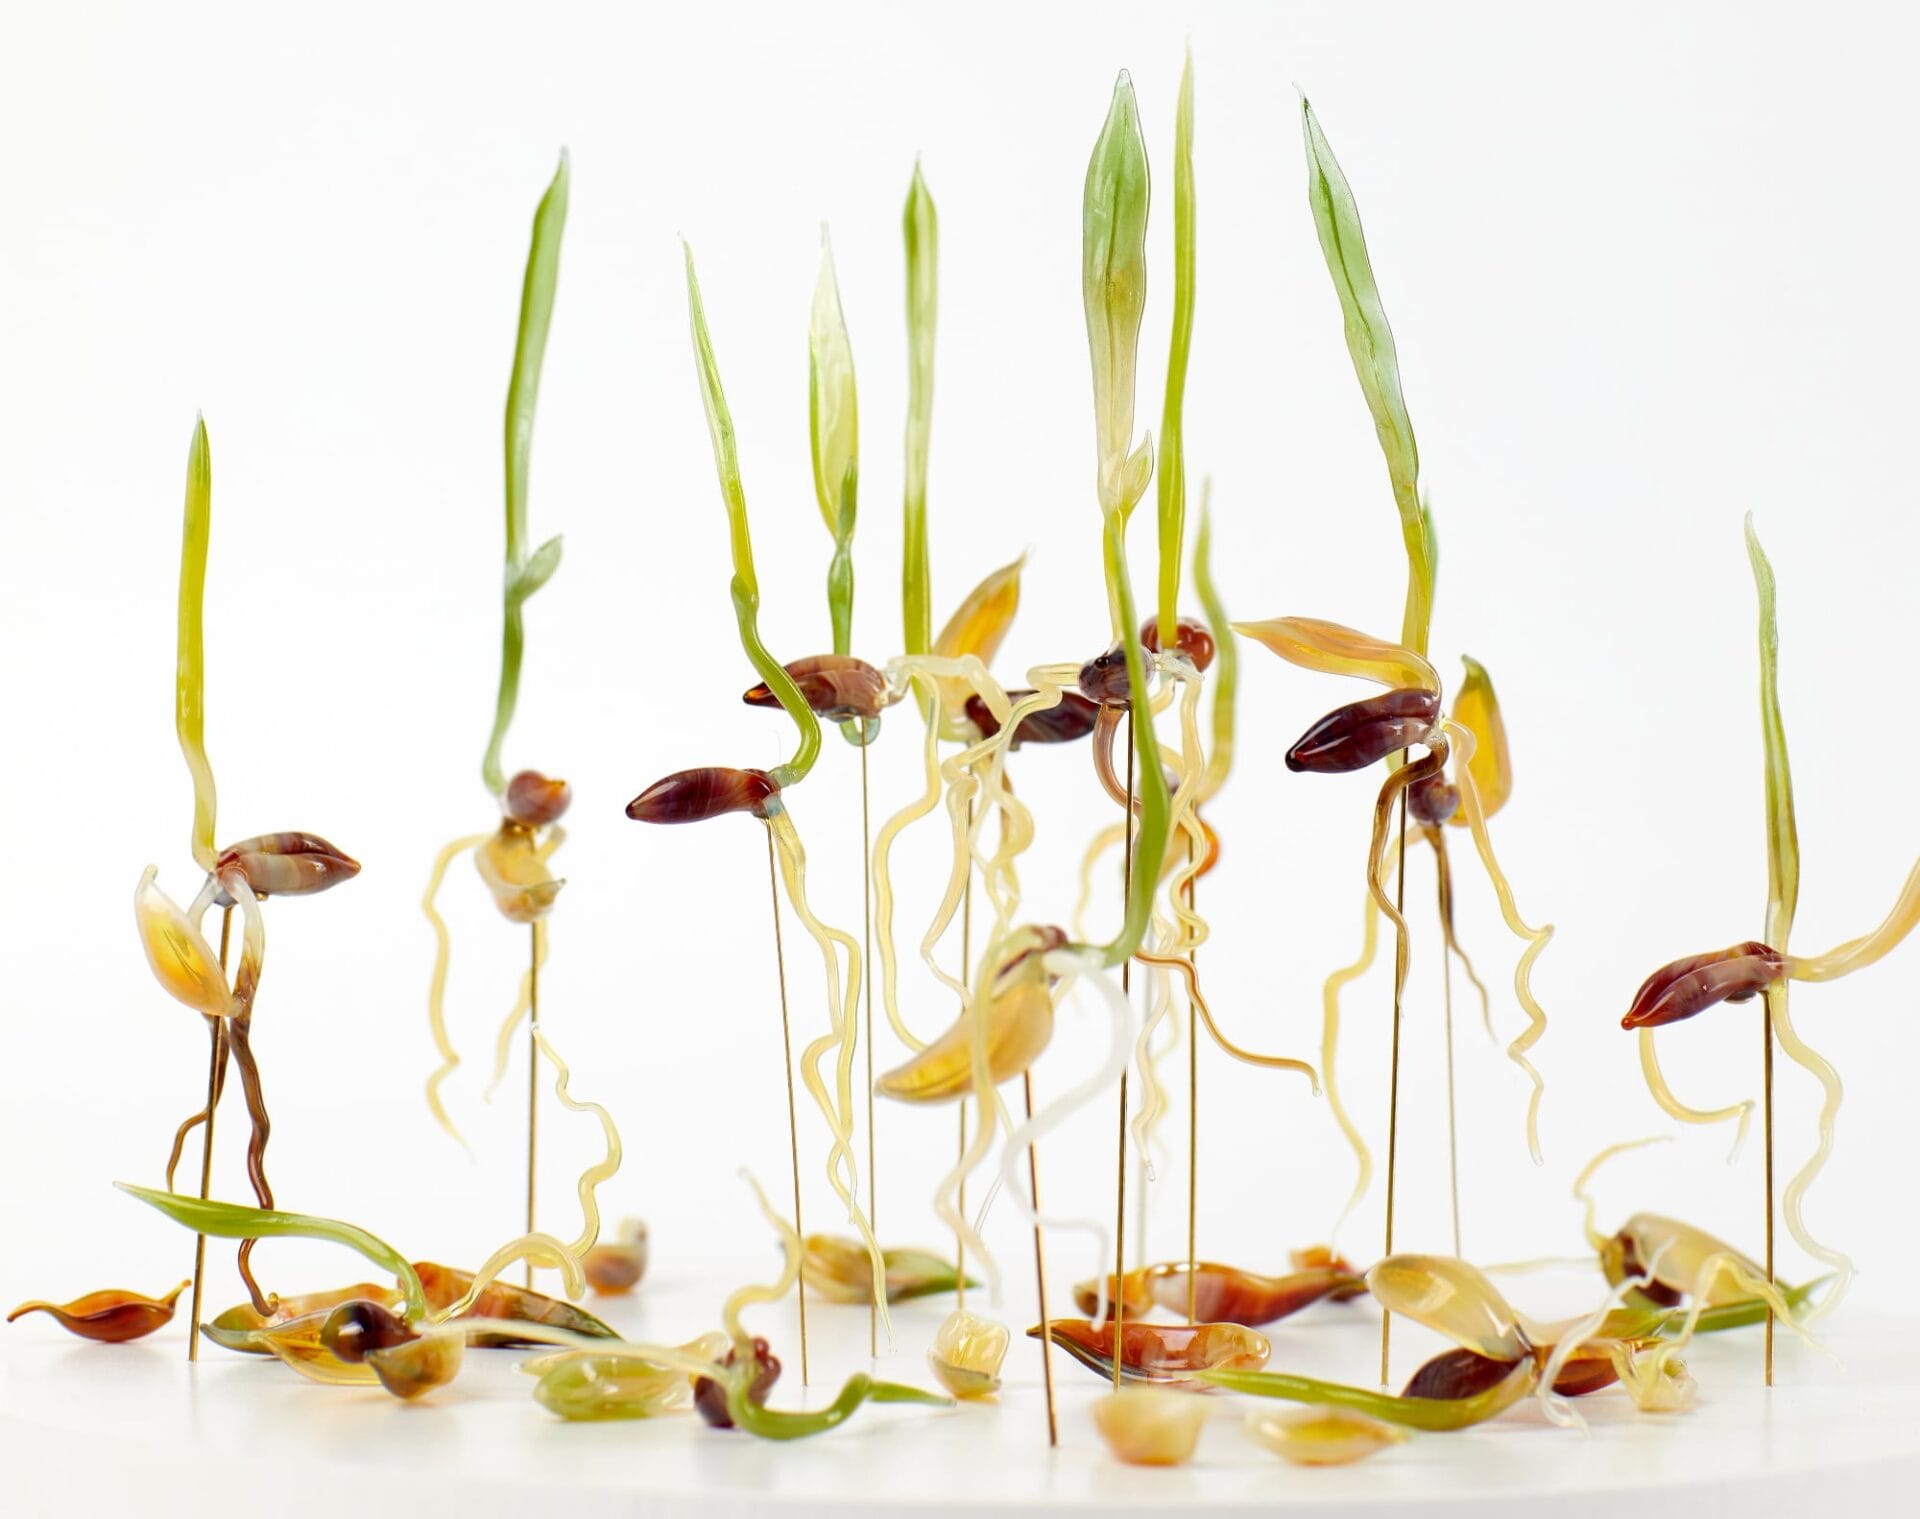 Through Delicate Glass Sprouts, Nataliya Vladychko Emphasizes the Wild Resiliency of Seeds